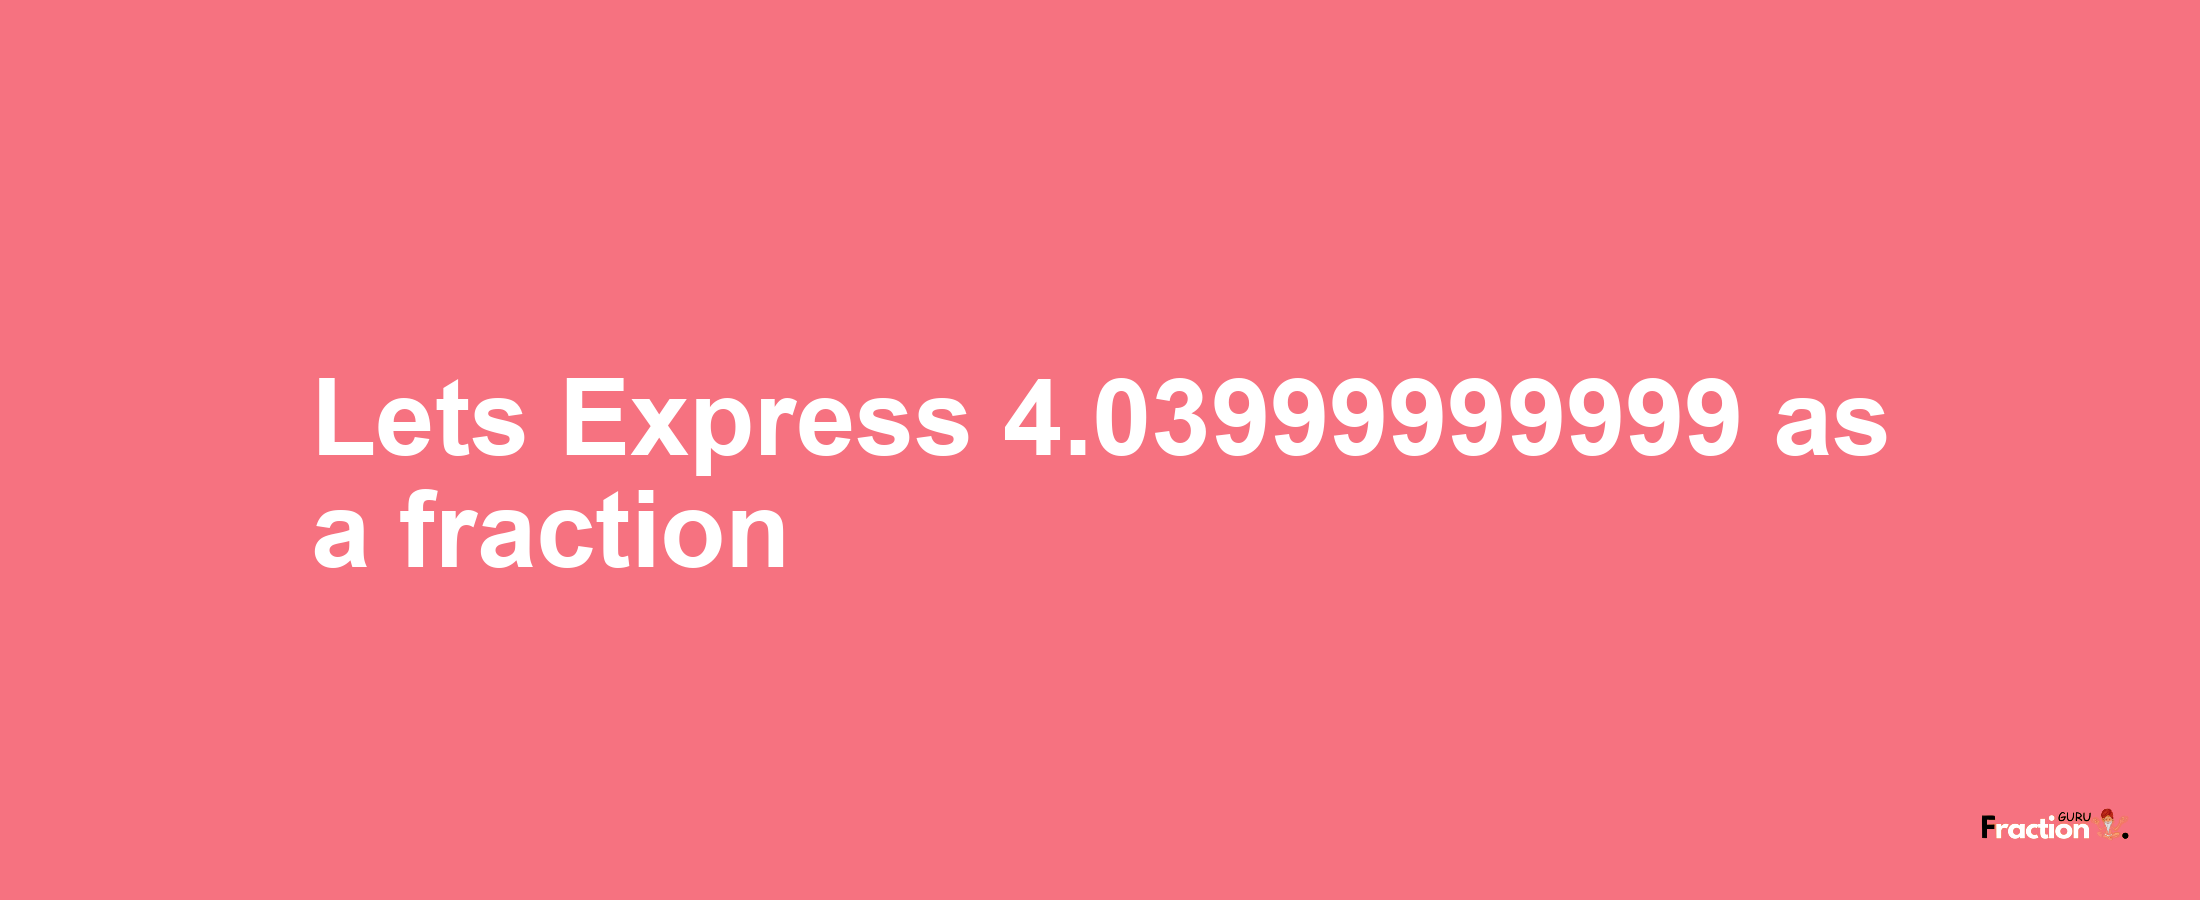 Lets Express 4.03999999999 as afraction